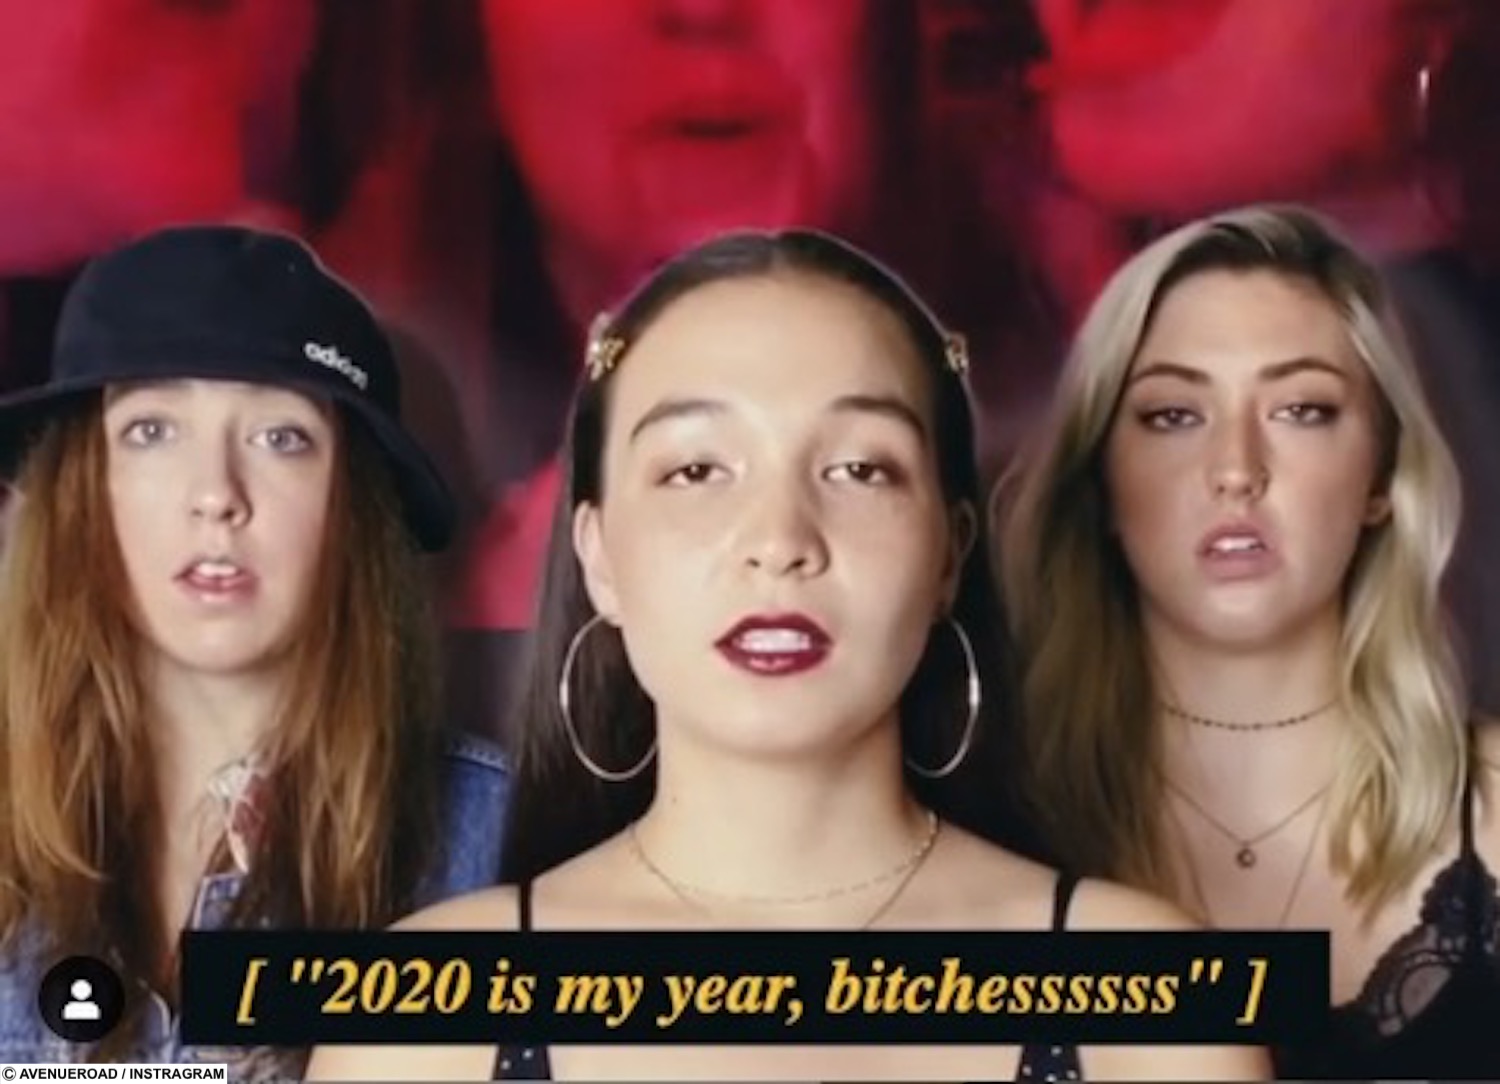 Hold everthing. We have  found 2020’s song.